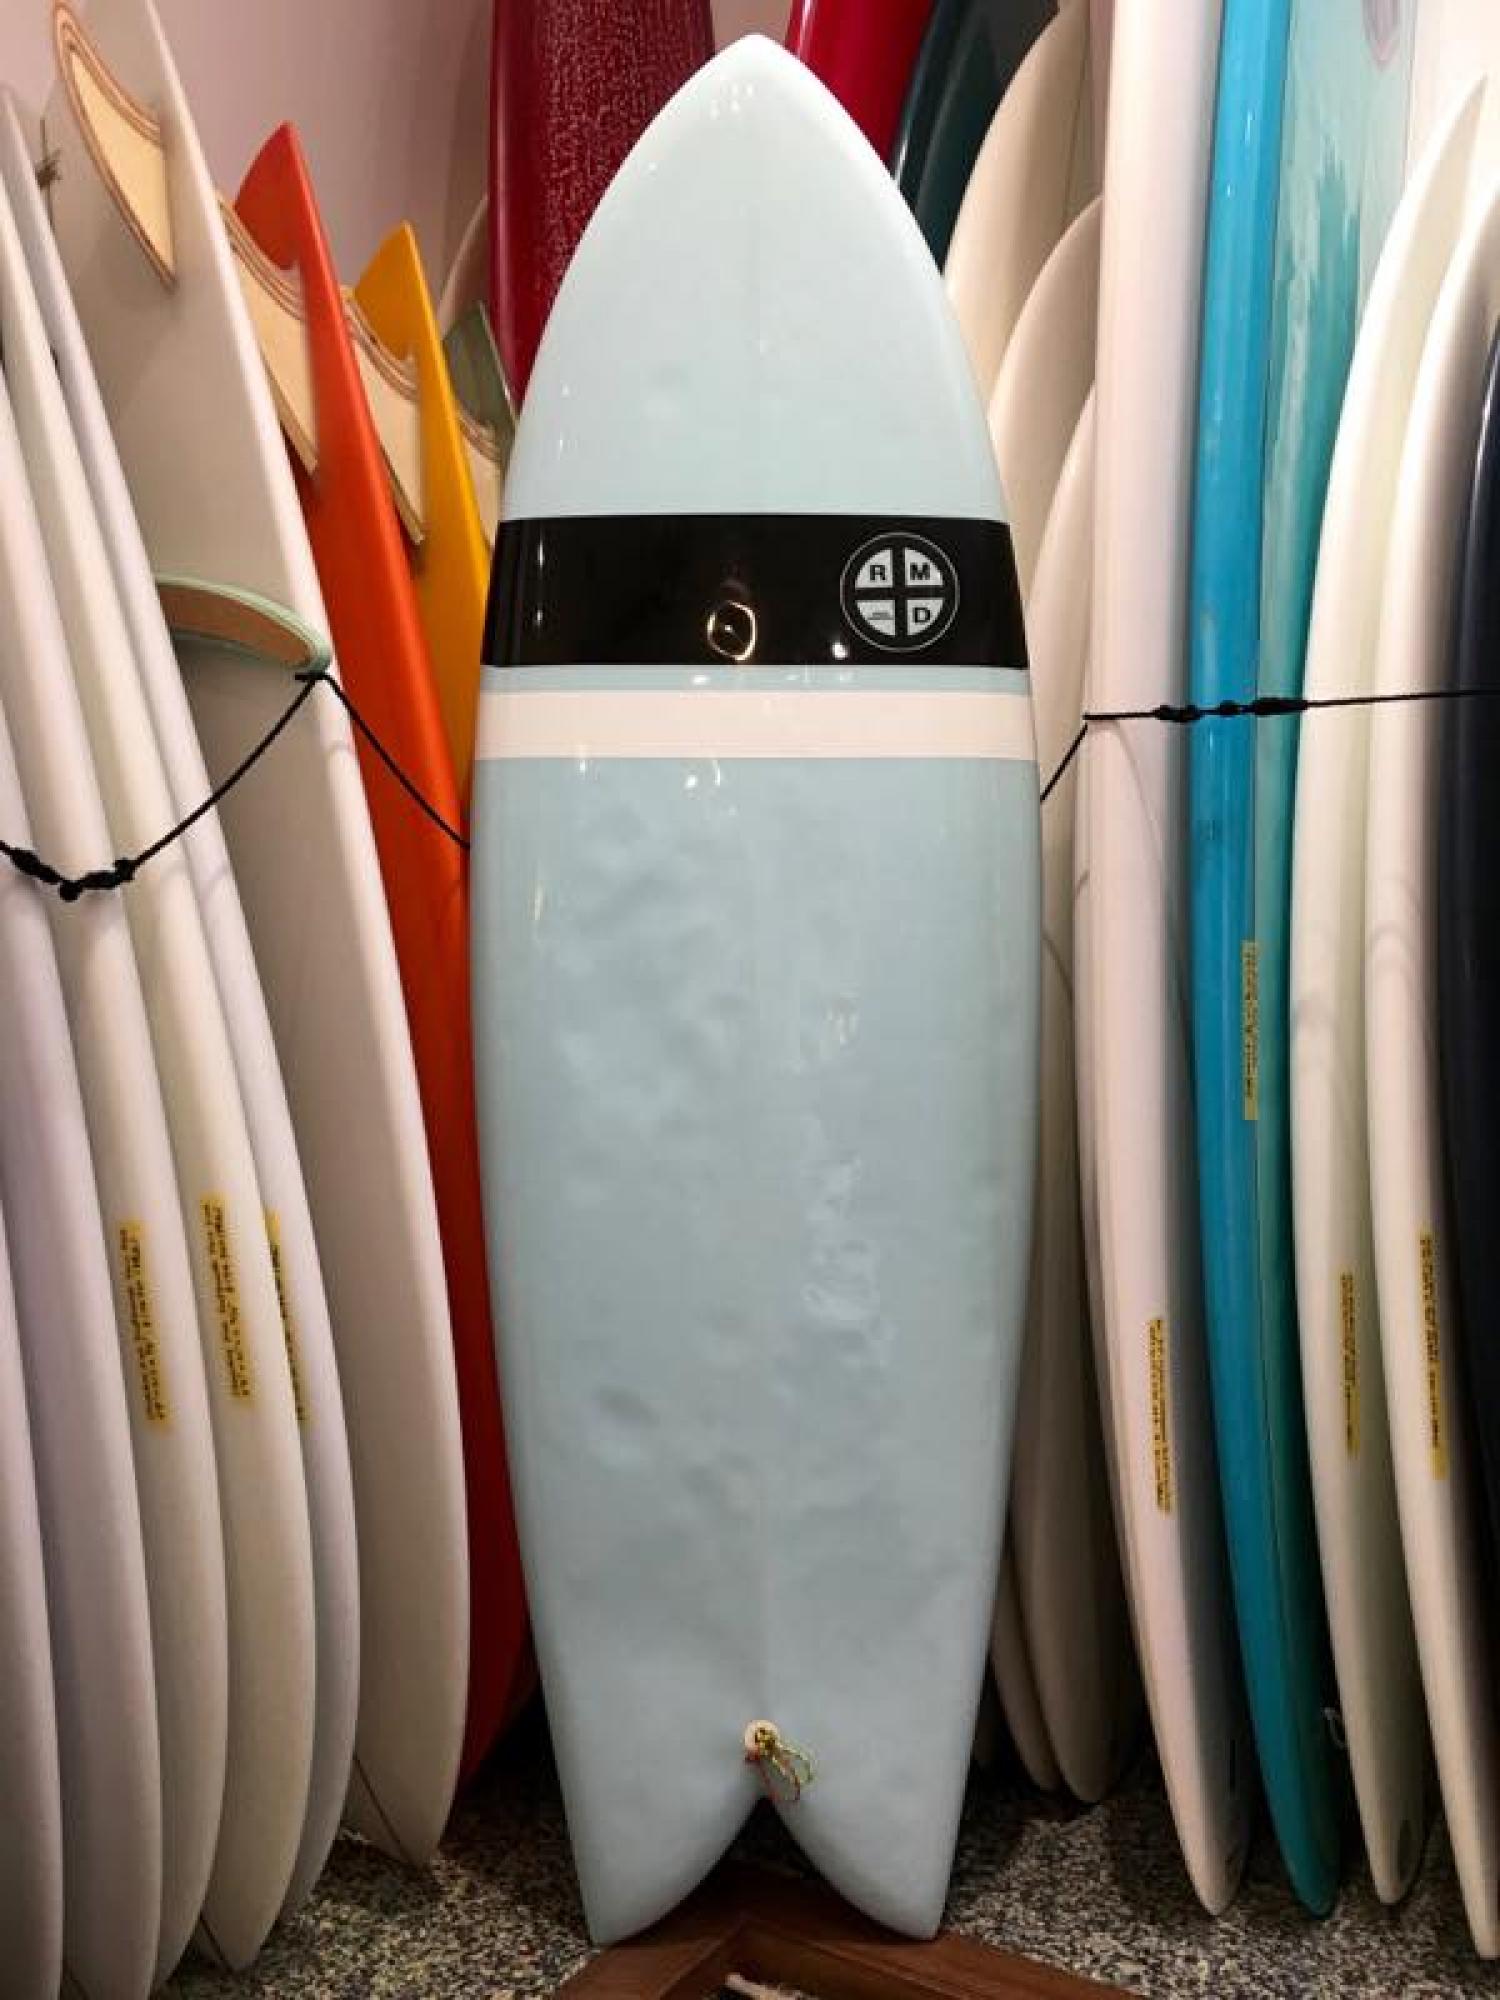 USED BOARDS (RMD SURFBOARDS 5.7 Hybrid Twin)